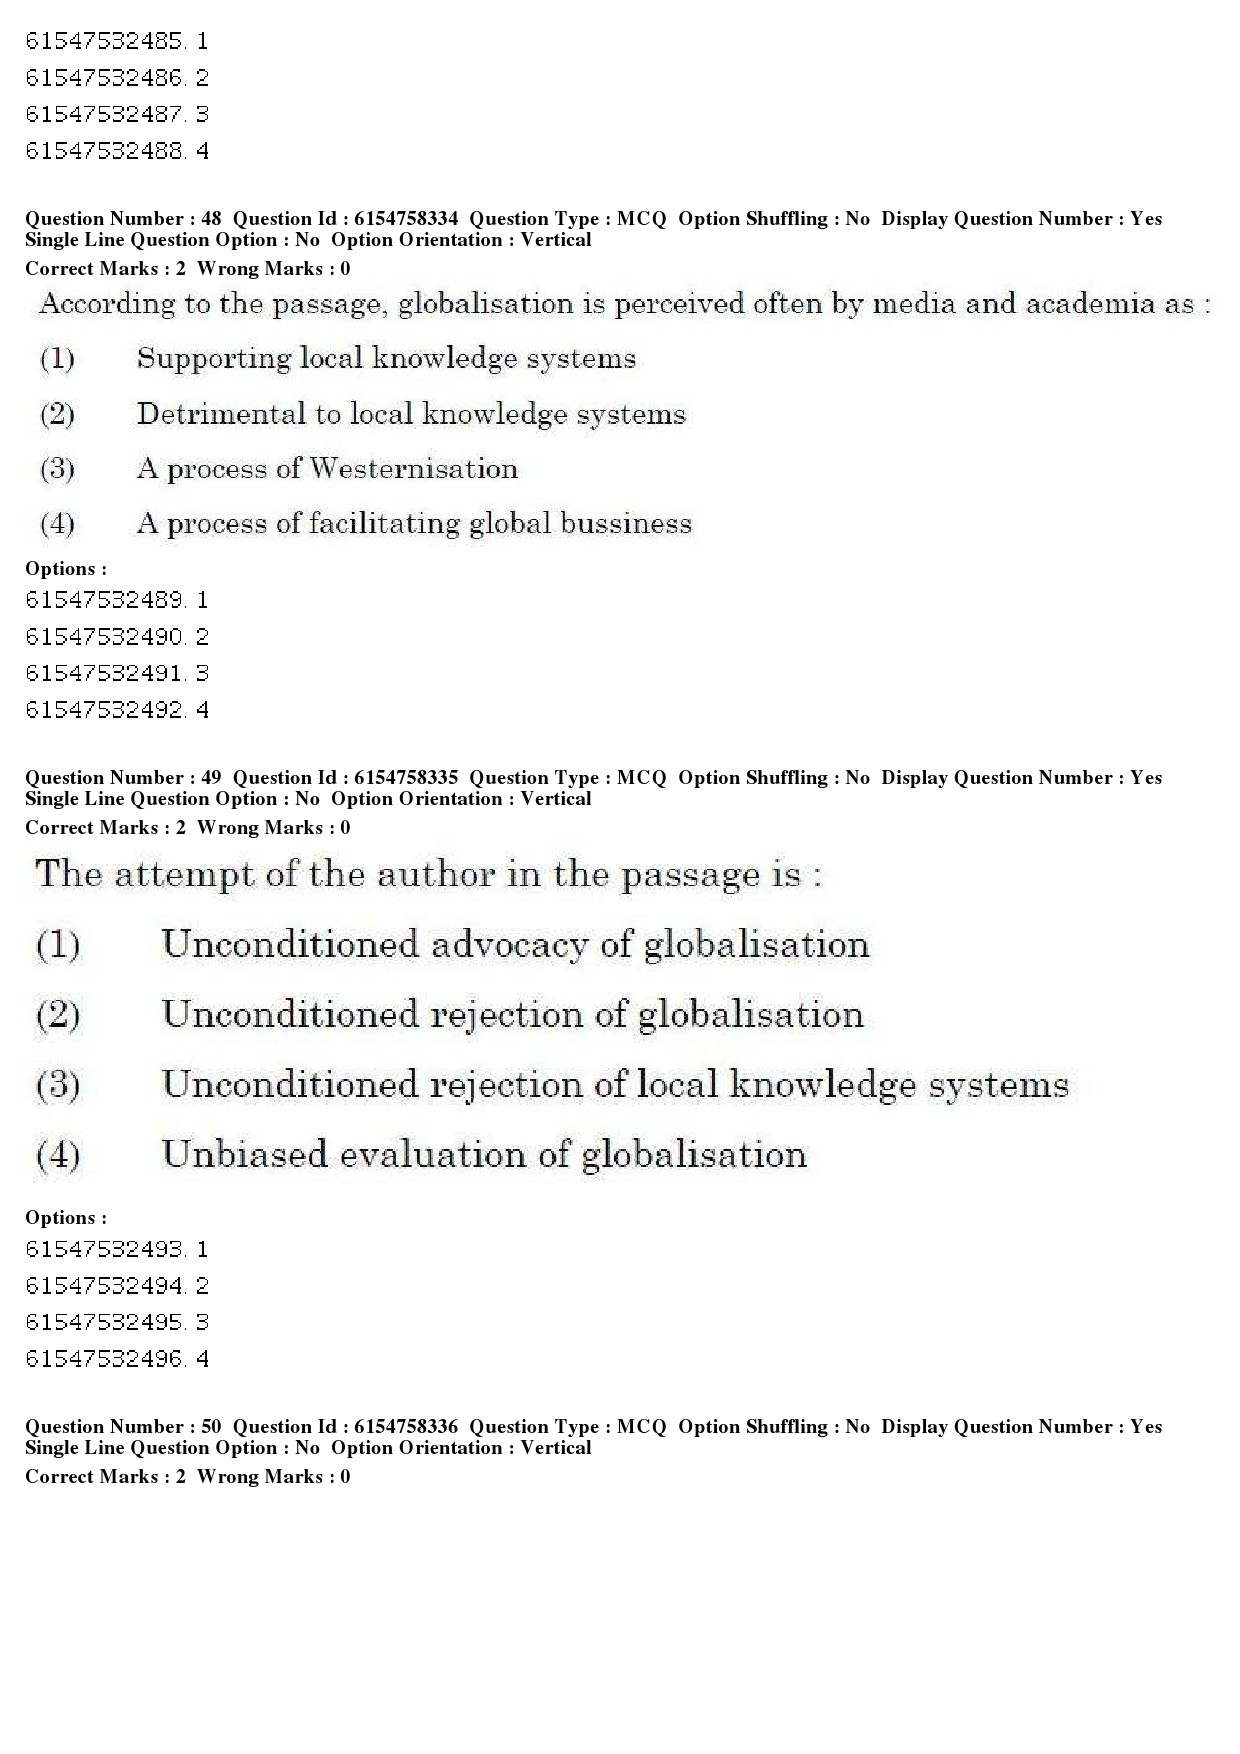 UGC NET Tourism Administration And Management Question Paper December 2019 50